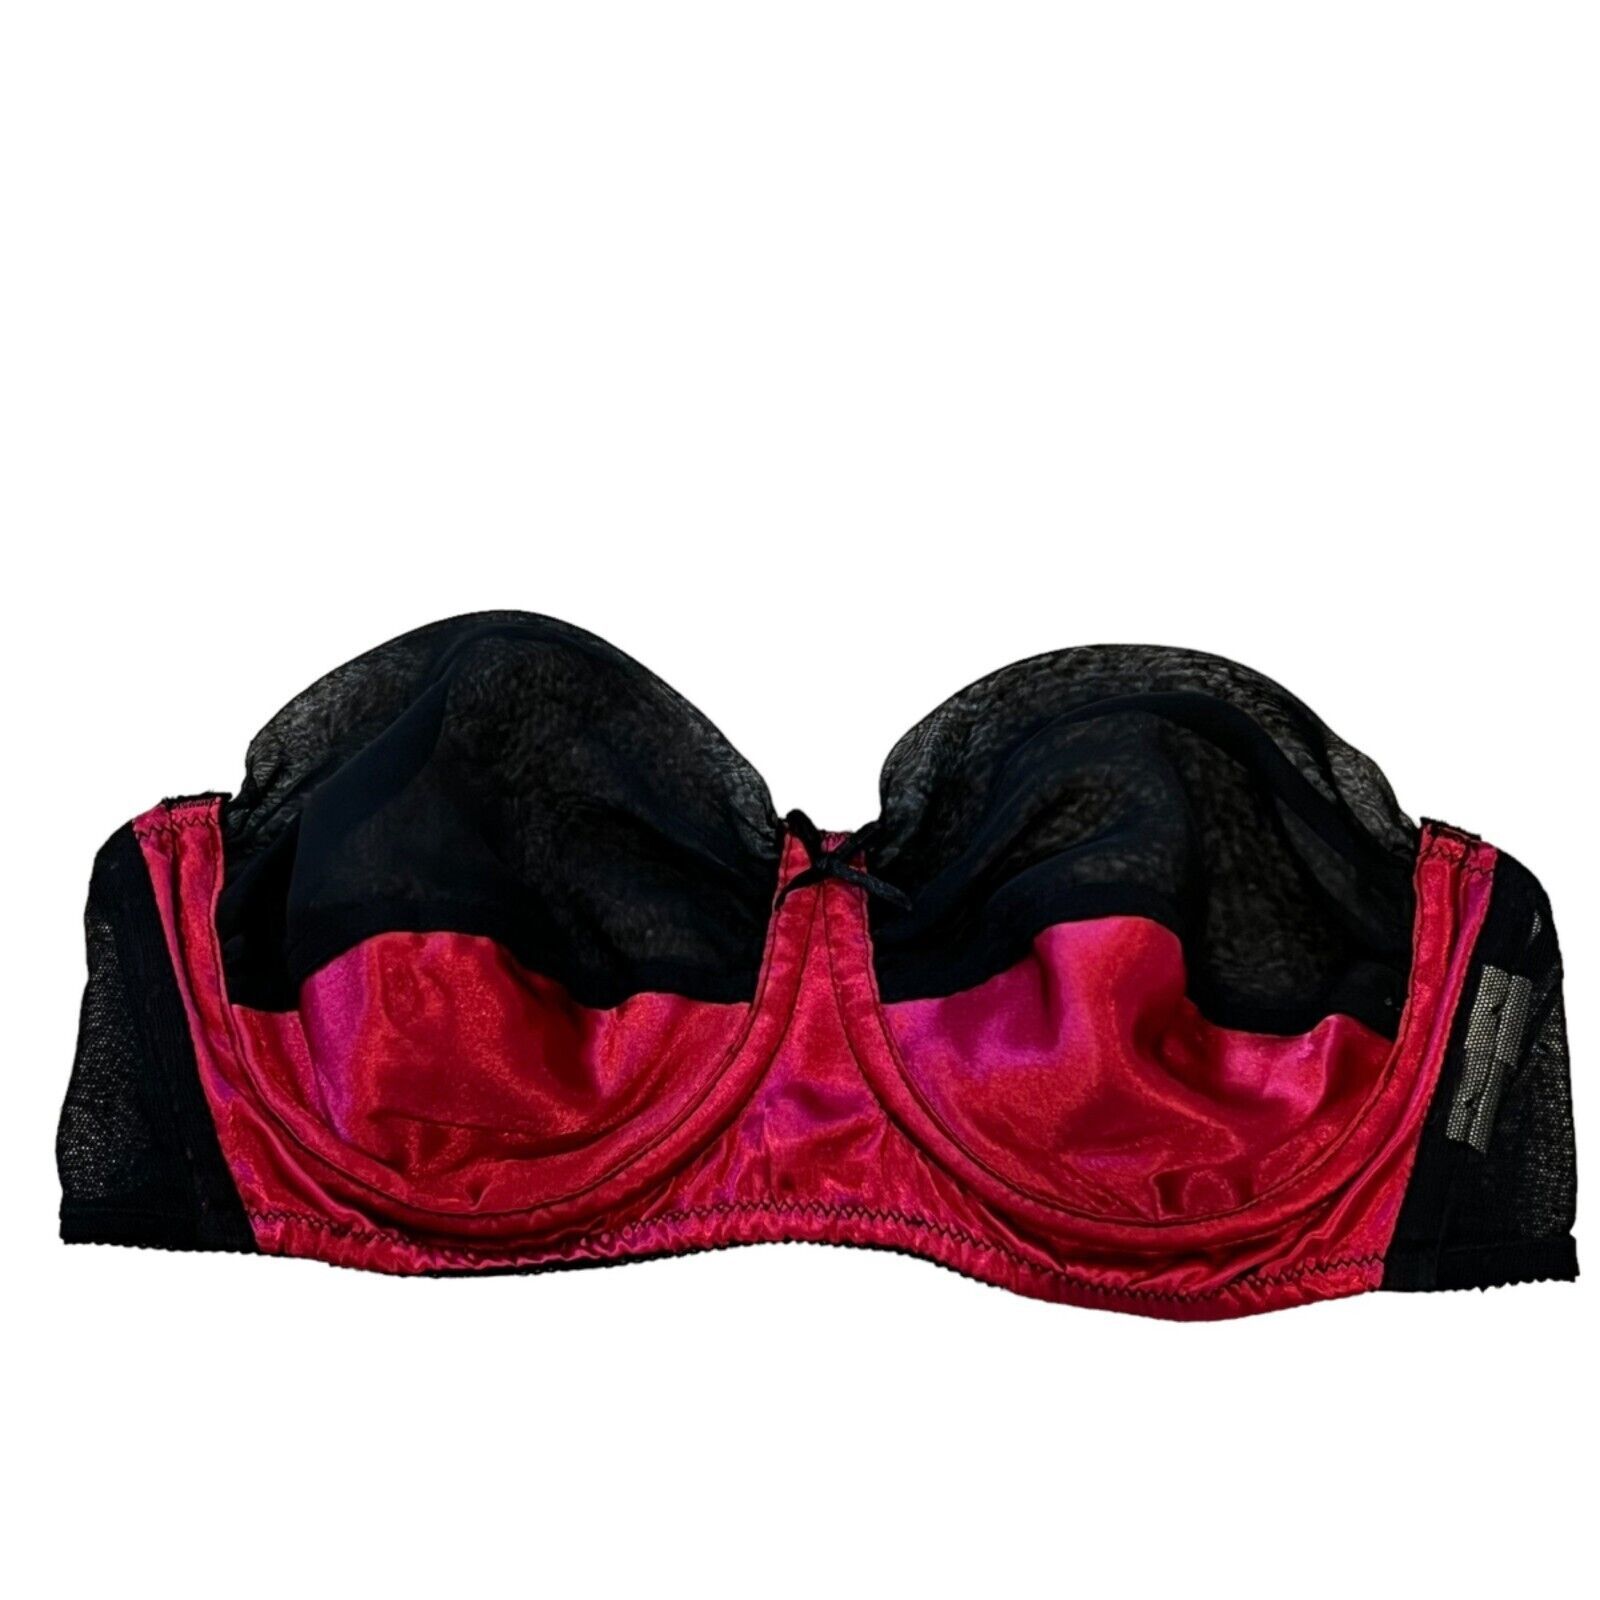 Primary image for Victoria's Secret Sexy Vintage Gold Label S/34 Semi-Sheer Push-Up Strapless Bra